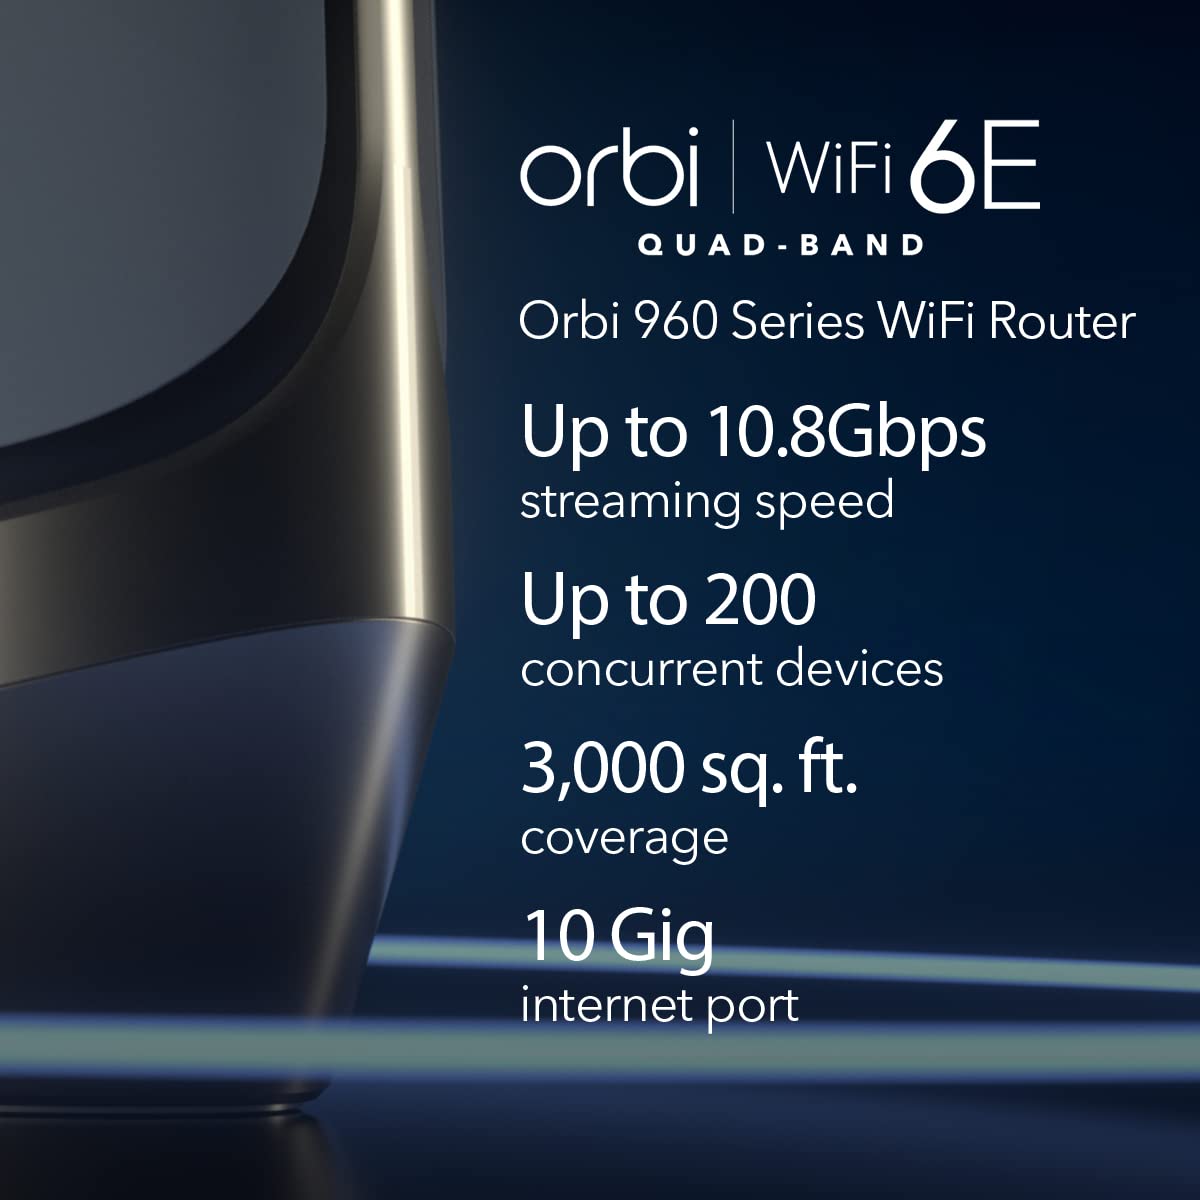 NETGEAR Orbi Quad-Band WiFi 6E Router (RBRE960), 10Gbps Speed, Coverage up to 3,000 sq. ft, 200 Devices, 10 Gig Internet Port, Expandable to Create A Mesh System, AXE11000 802.11ax